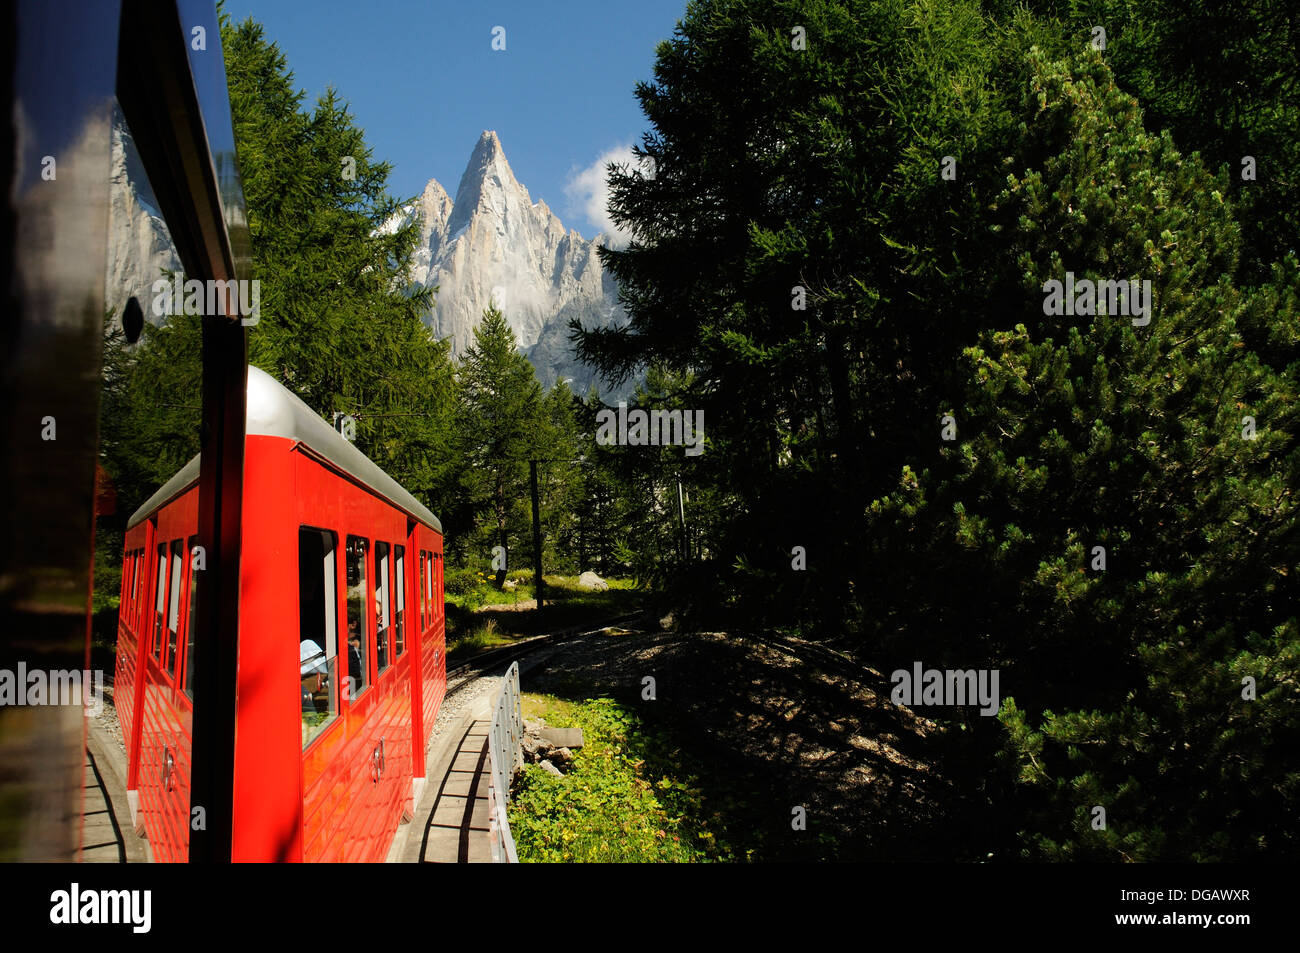 The aiguille de Dru and Montenvers seen from inside the Montenvers funicular railway, Chamonix, France Stock Photo